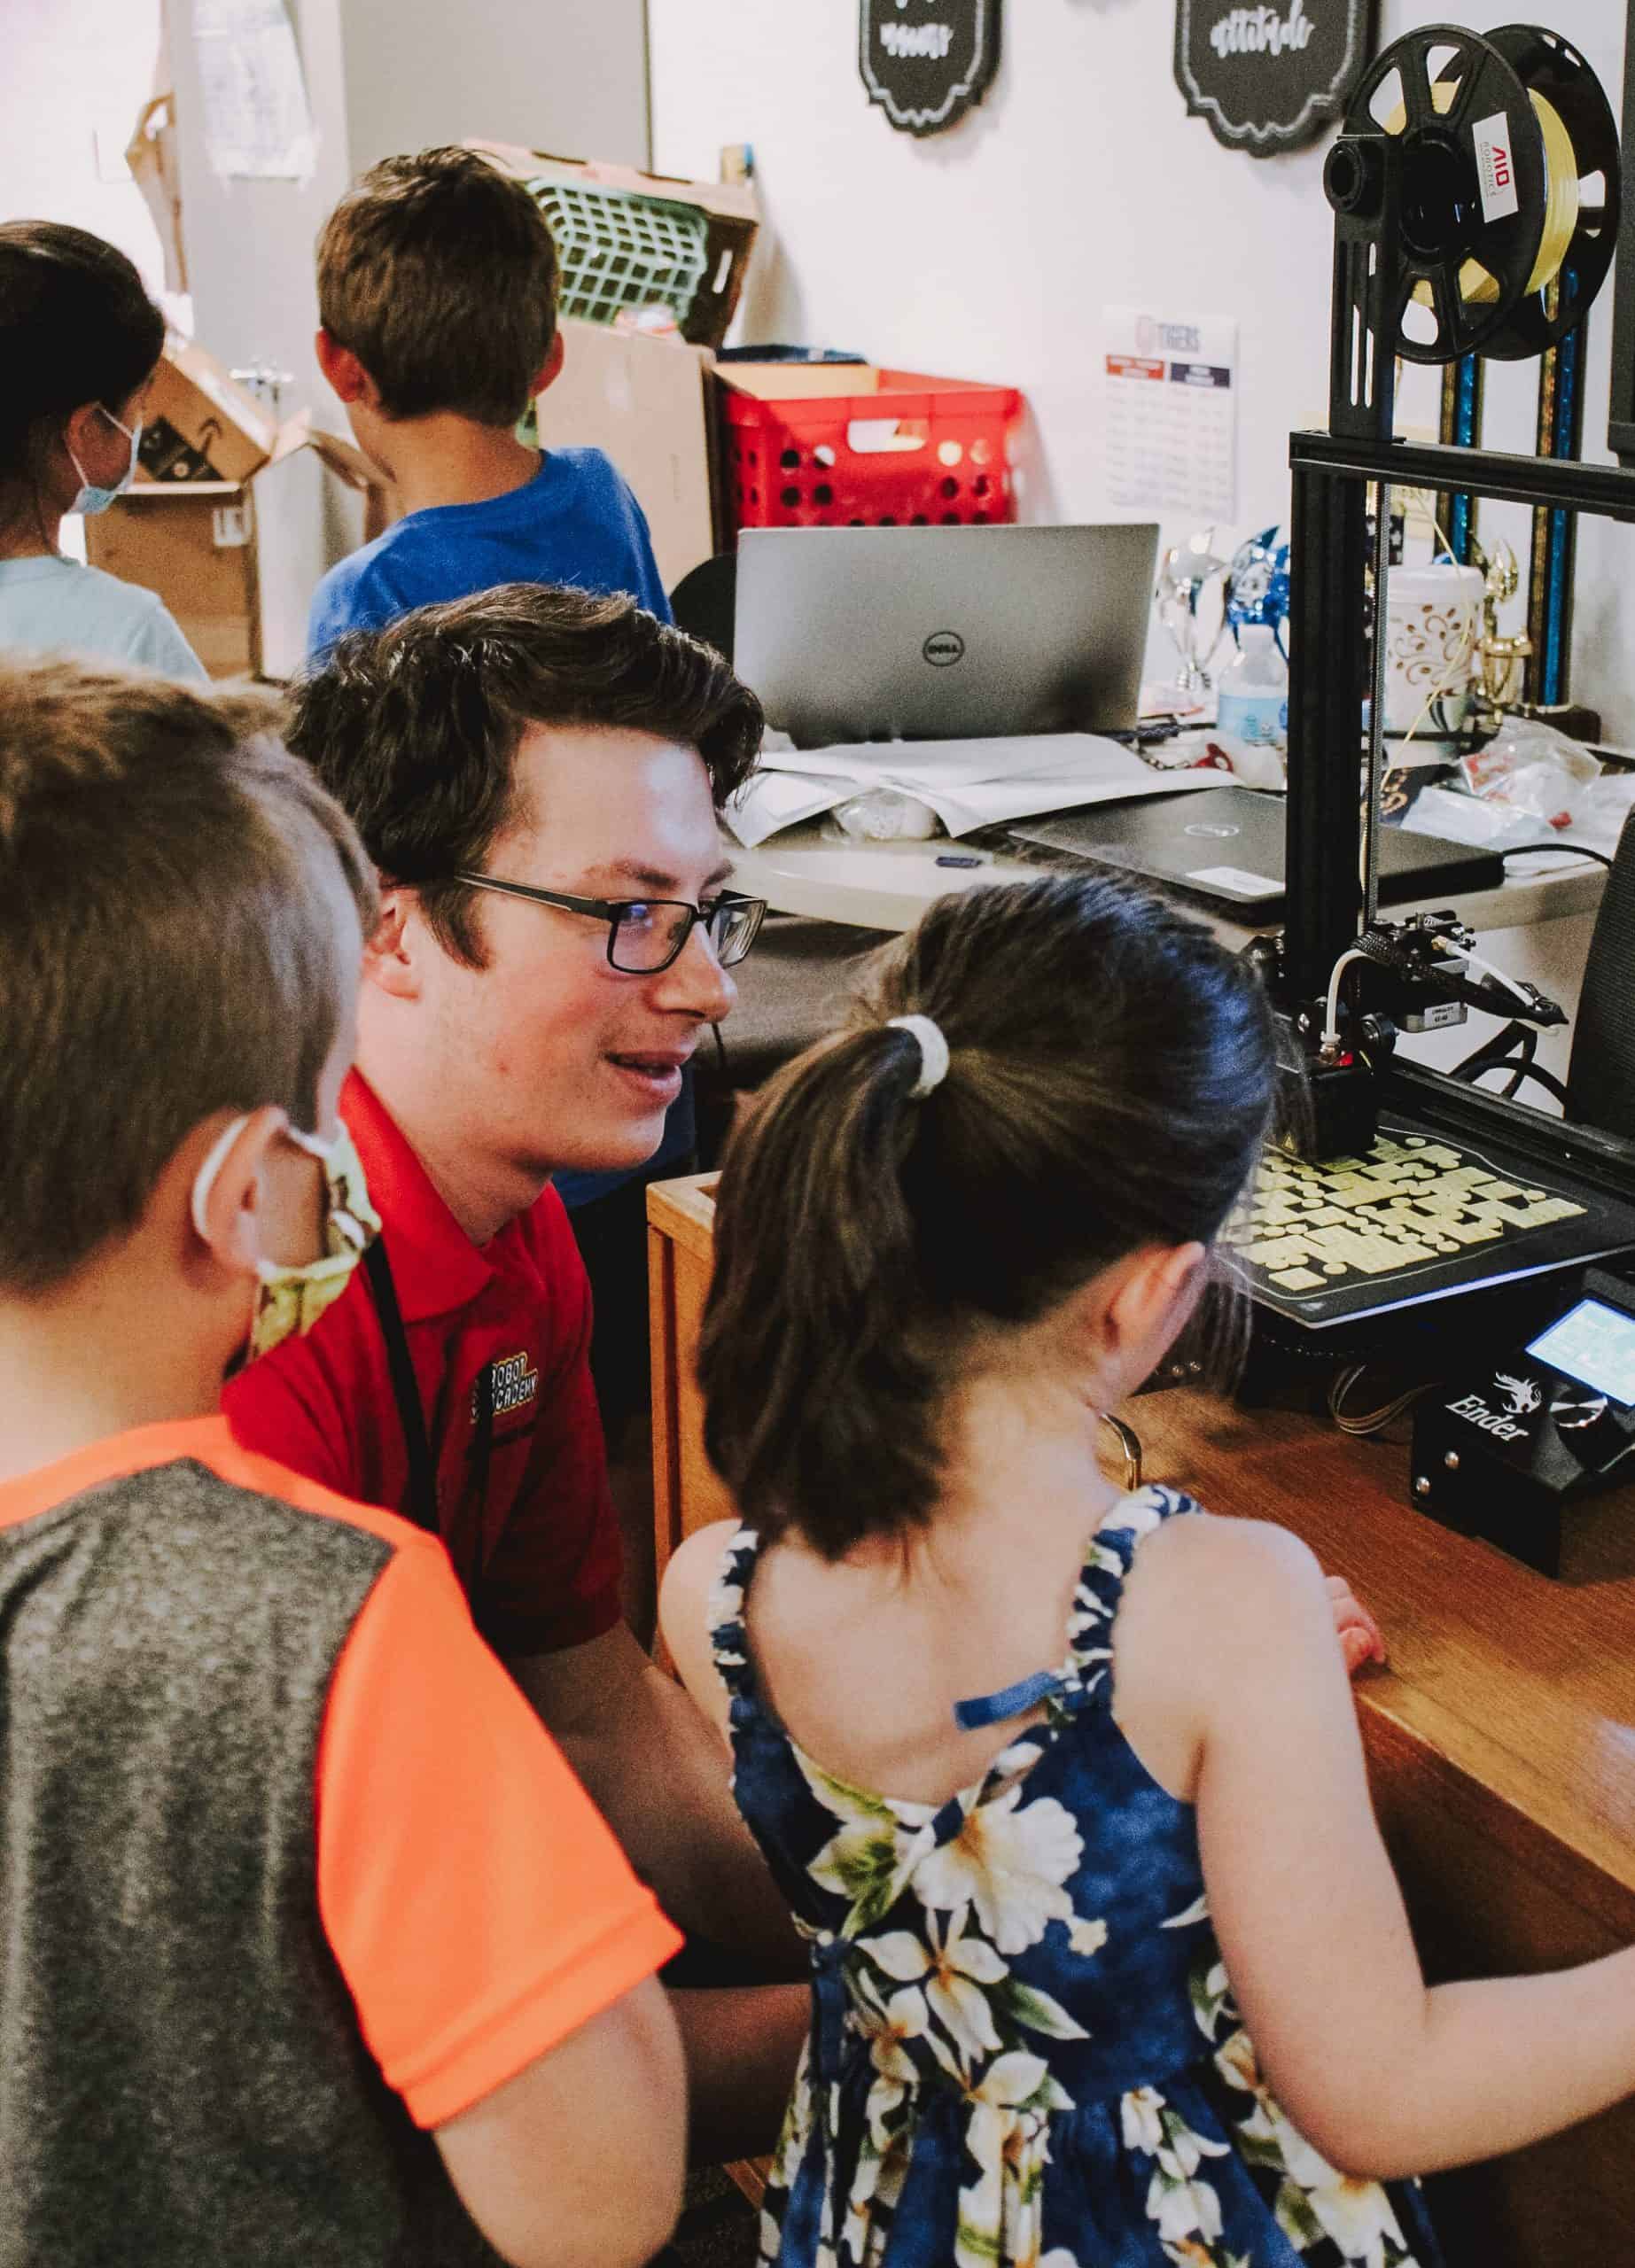 You are currently viewing Jr. LEGO® Robotics & 3D Printing Camp for ages 5 to 8 | Full Day | 5 Days: July 24-28, 2023 | 9:30 am to 4:30 pm | Powell